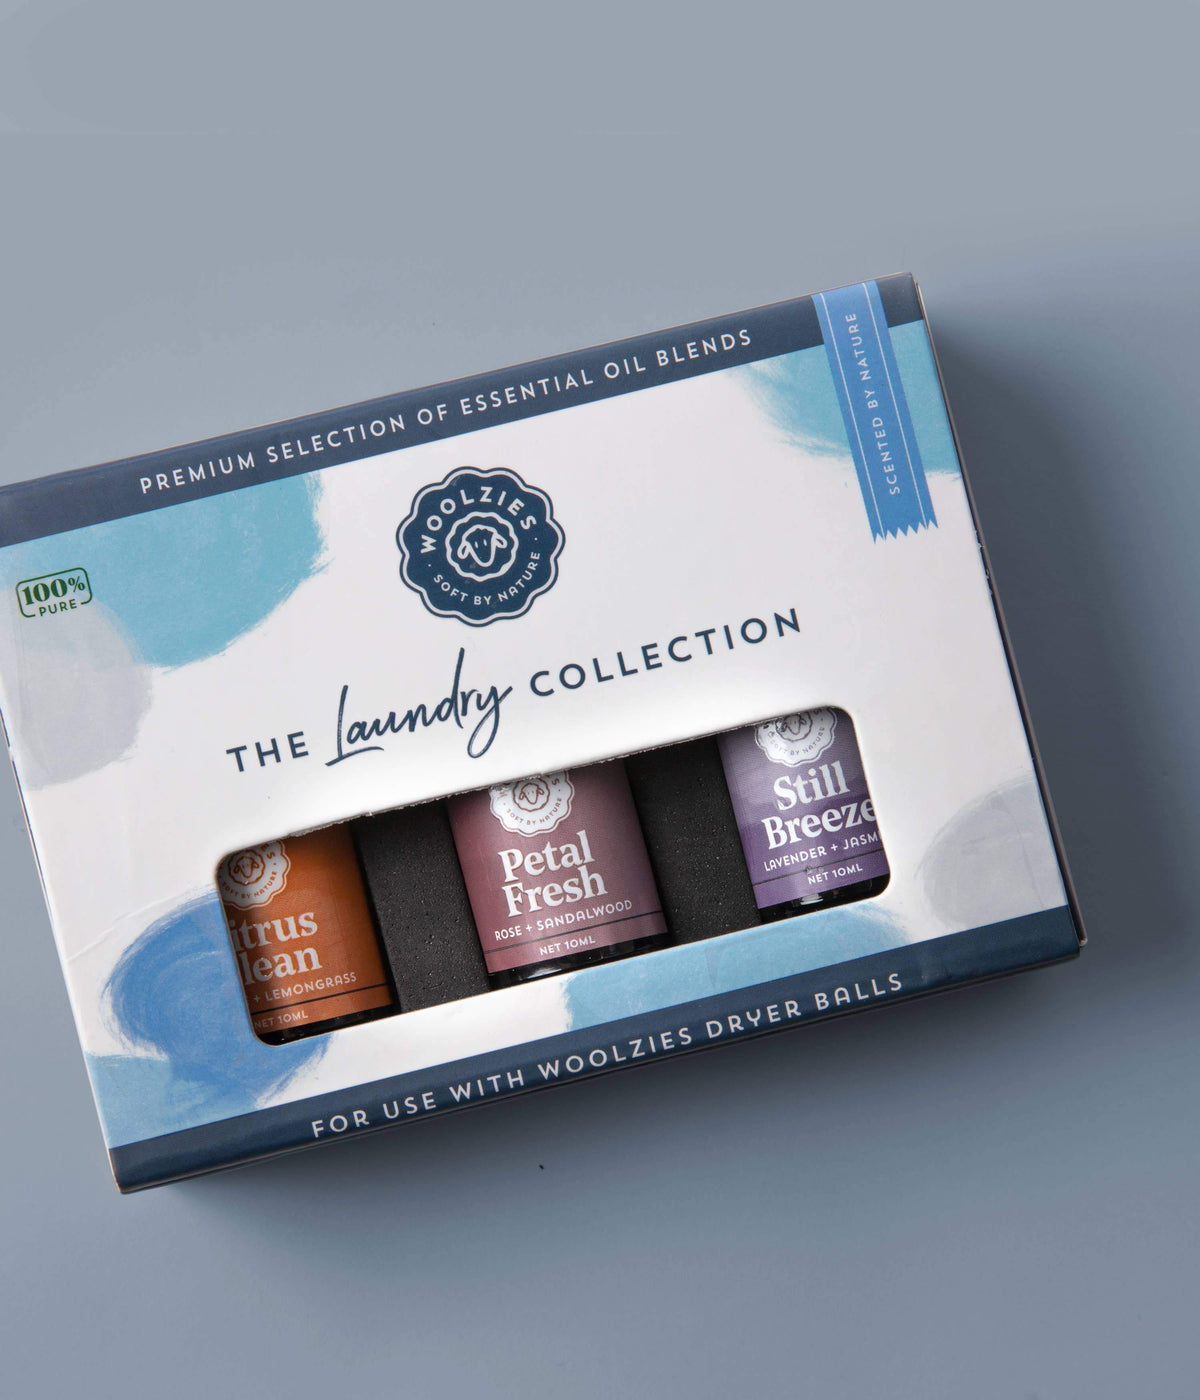 A box labeled "Woolzies The Laundry Essential Oil Collection" containing three essential oil blends: citrus clean, petal fresh, and still breeze, specifically designed for use with Woolzies wool dryer.